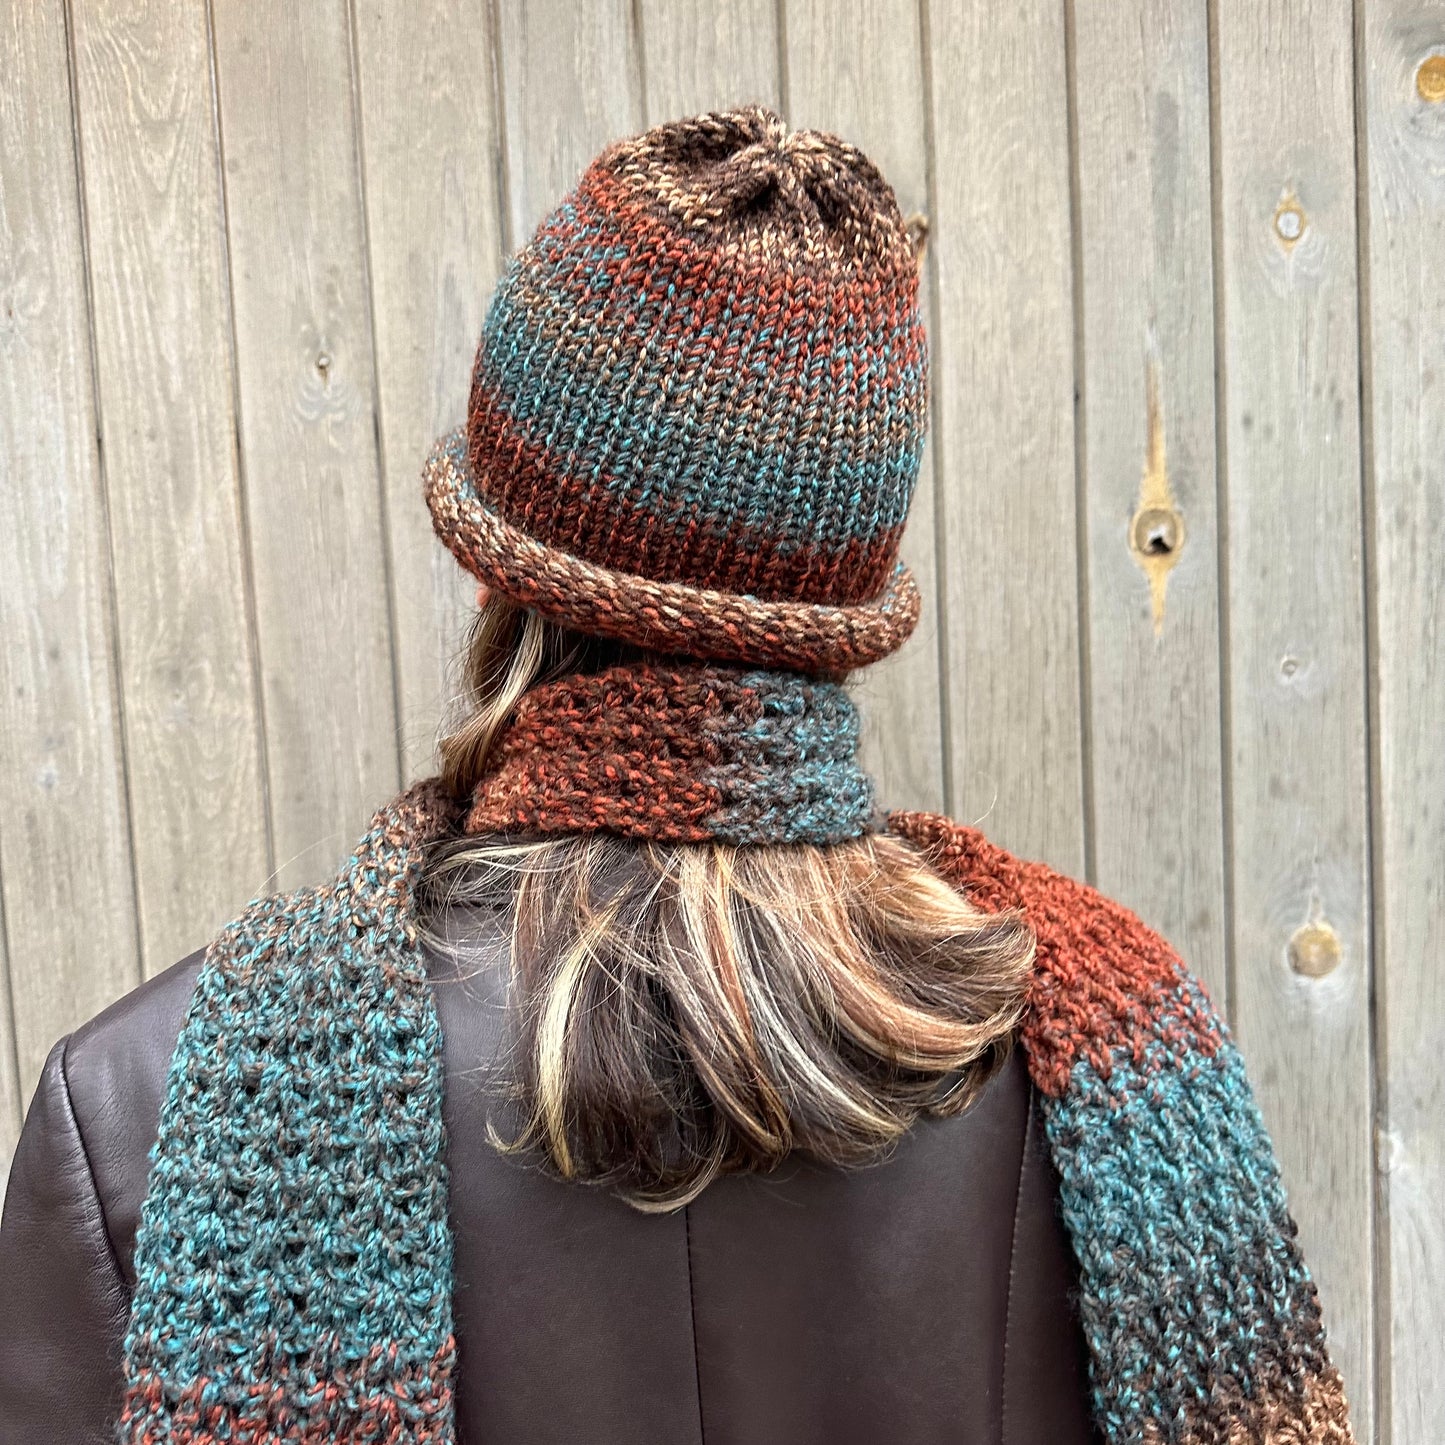 Handmade knitted brown and blue ombré beanie